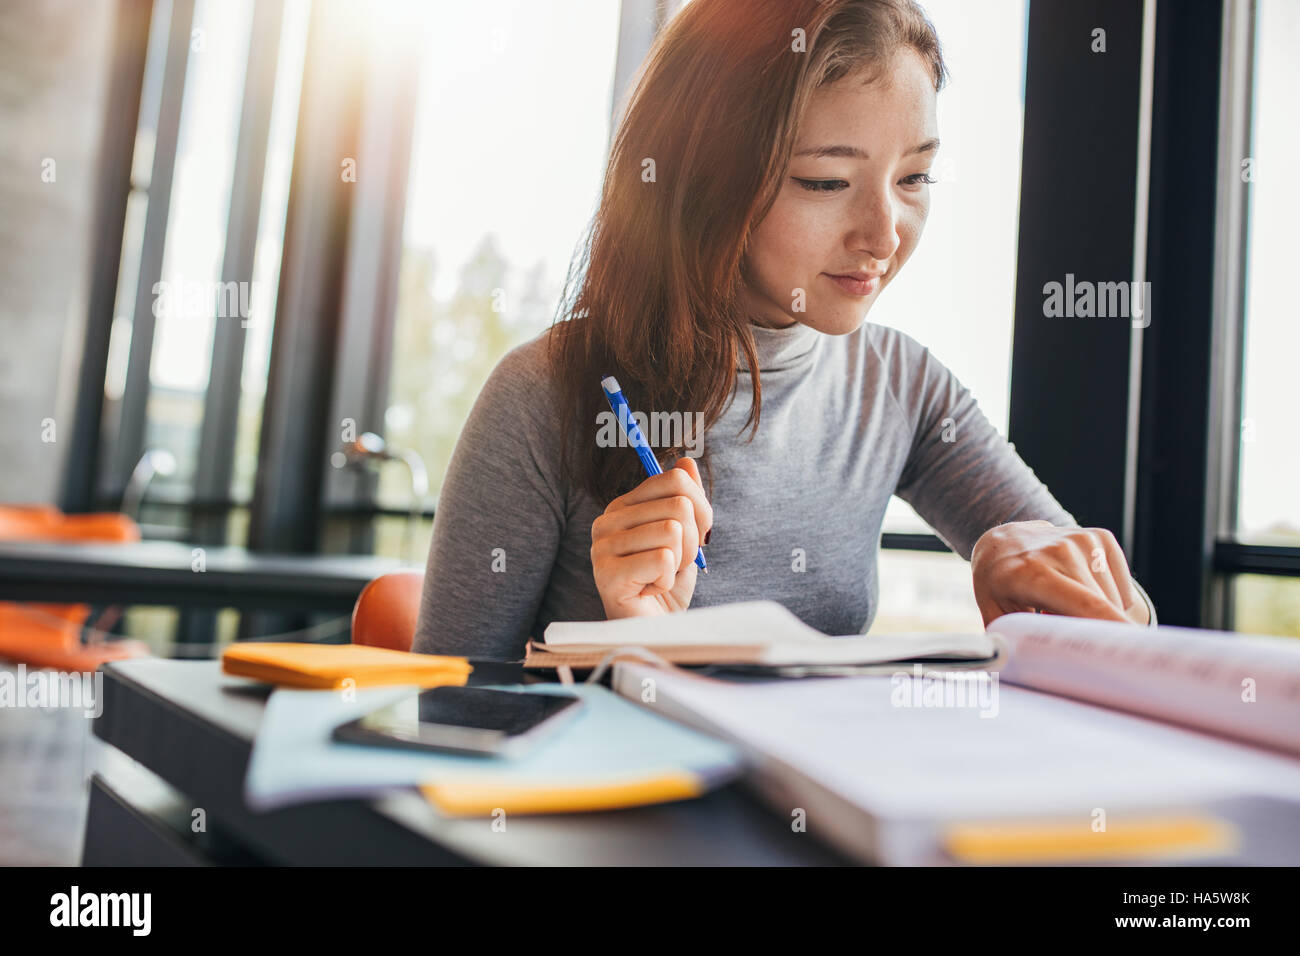 Young asian woman reading book in university library. Female student preparing for final exams. Stock Photo